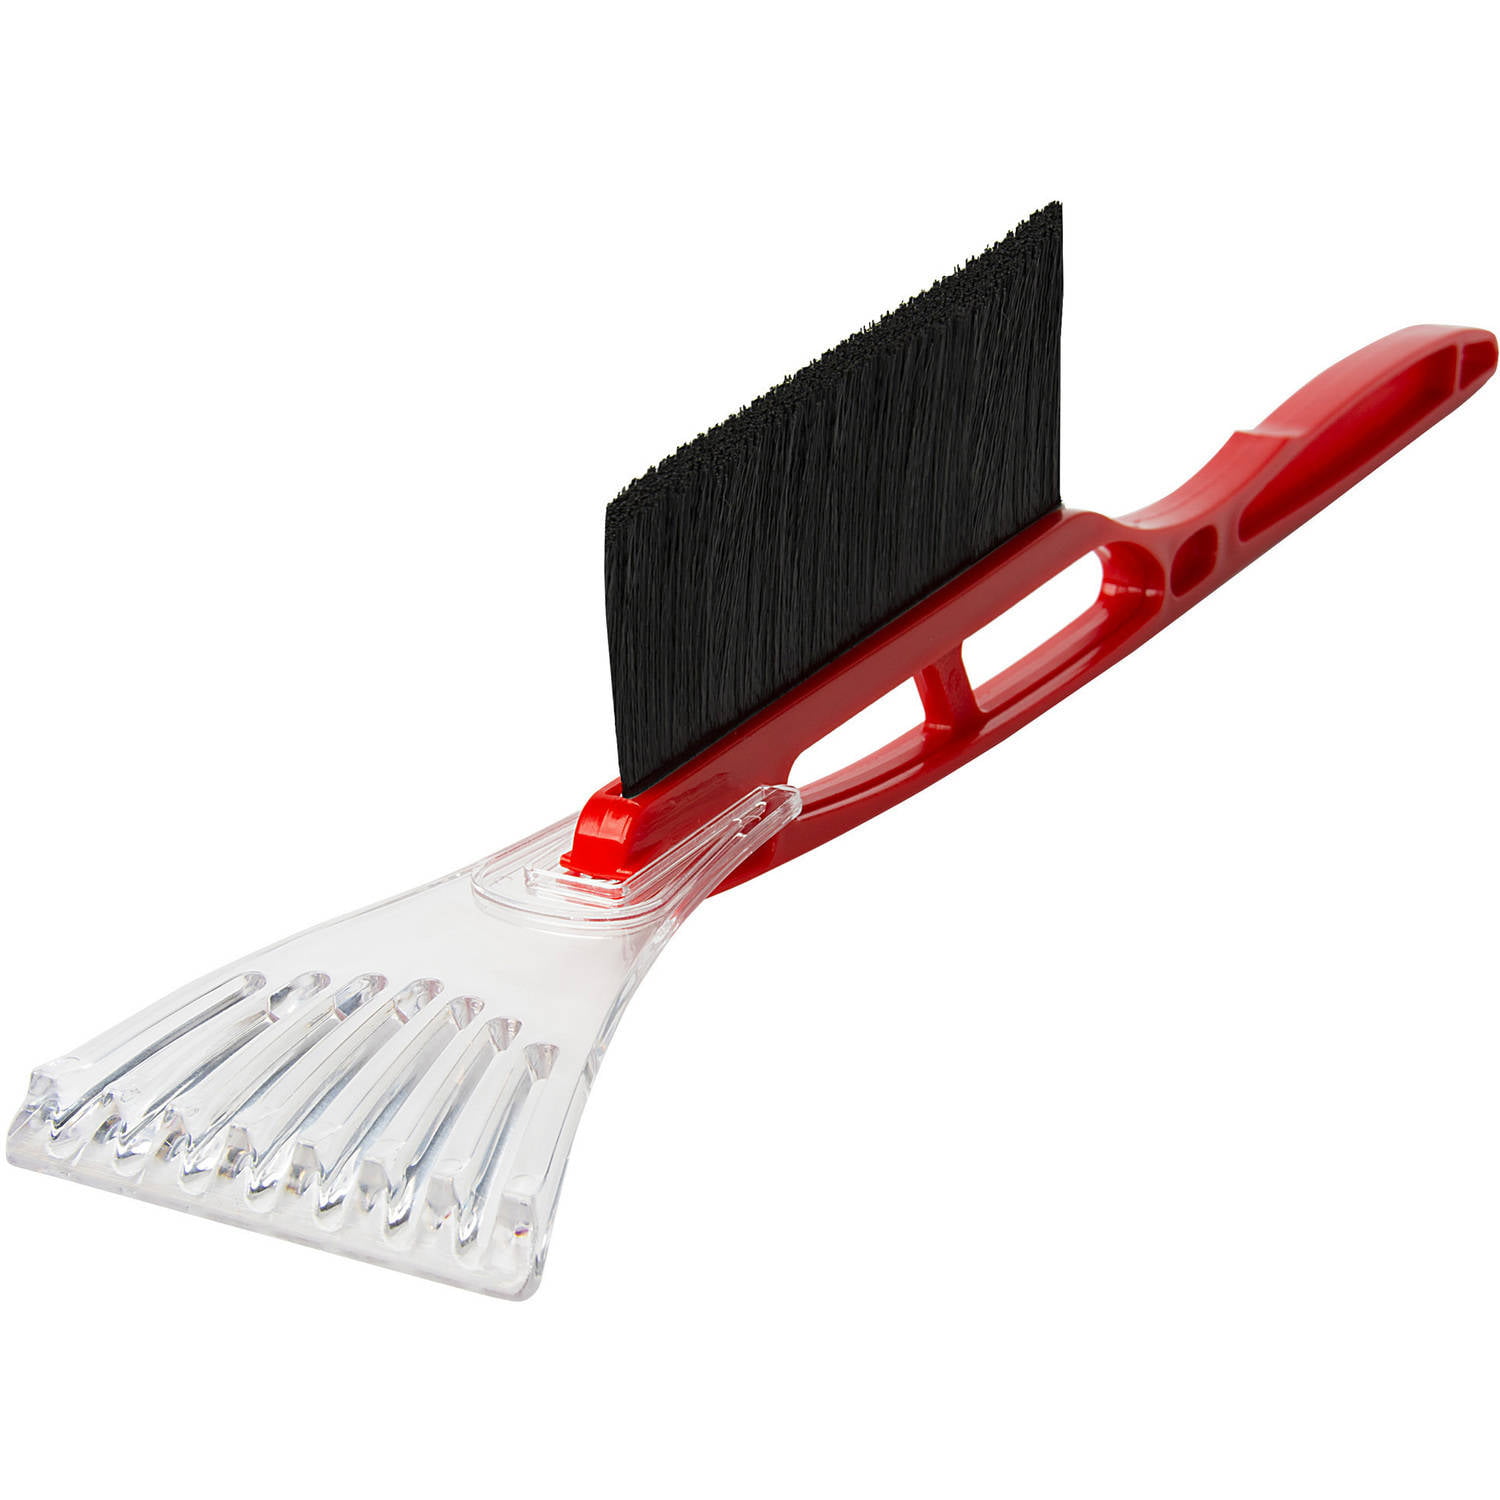 ALEKO ICB02RED Tough Ice Scraper with Snow Brush Long Handle Durable No-Scratch Scraper Defroster Red 